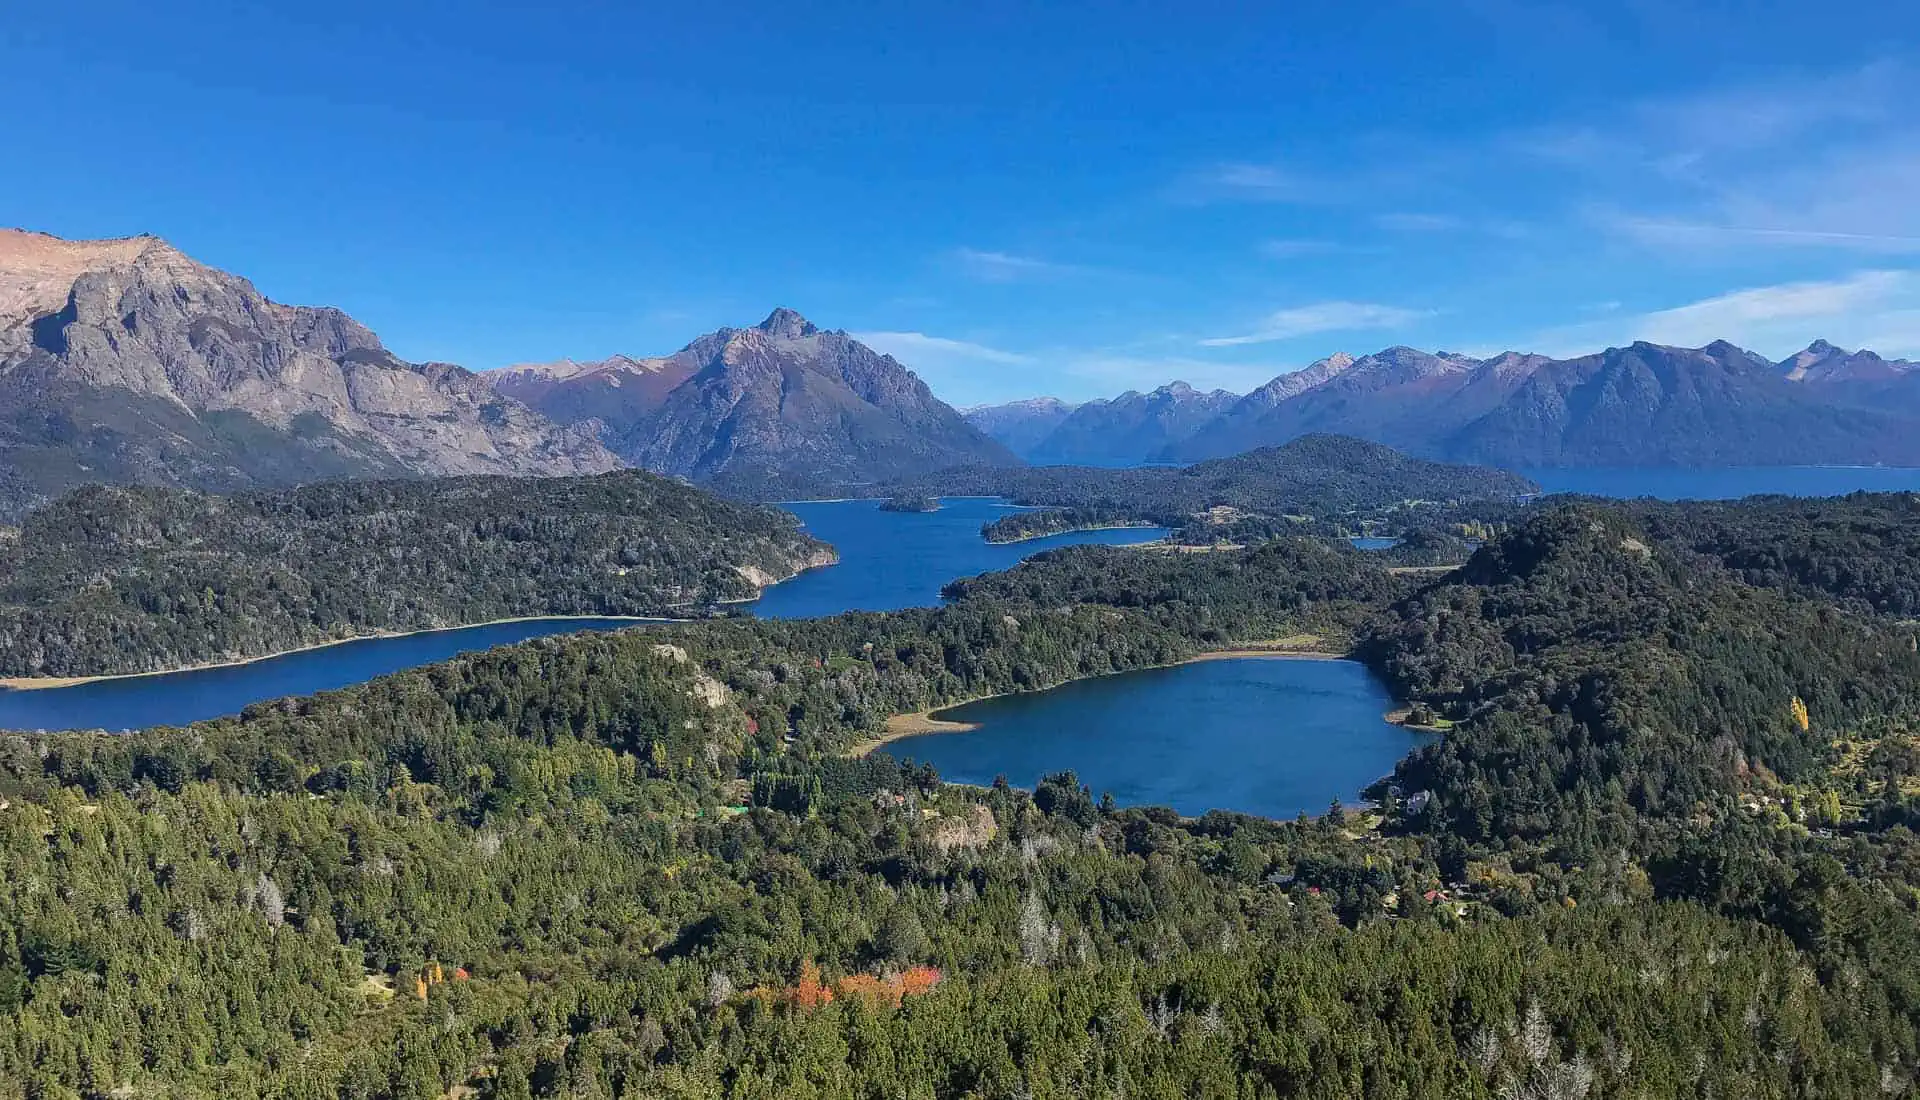 Incredible views from Cerro Campanario make this hike one of the best things to do in Bariloche.